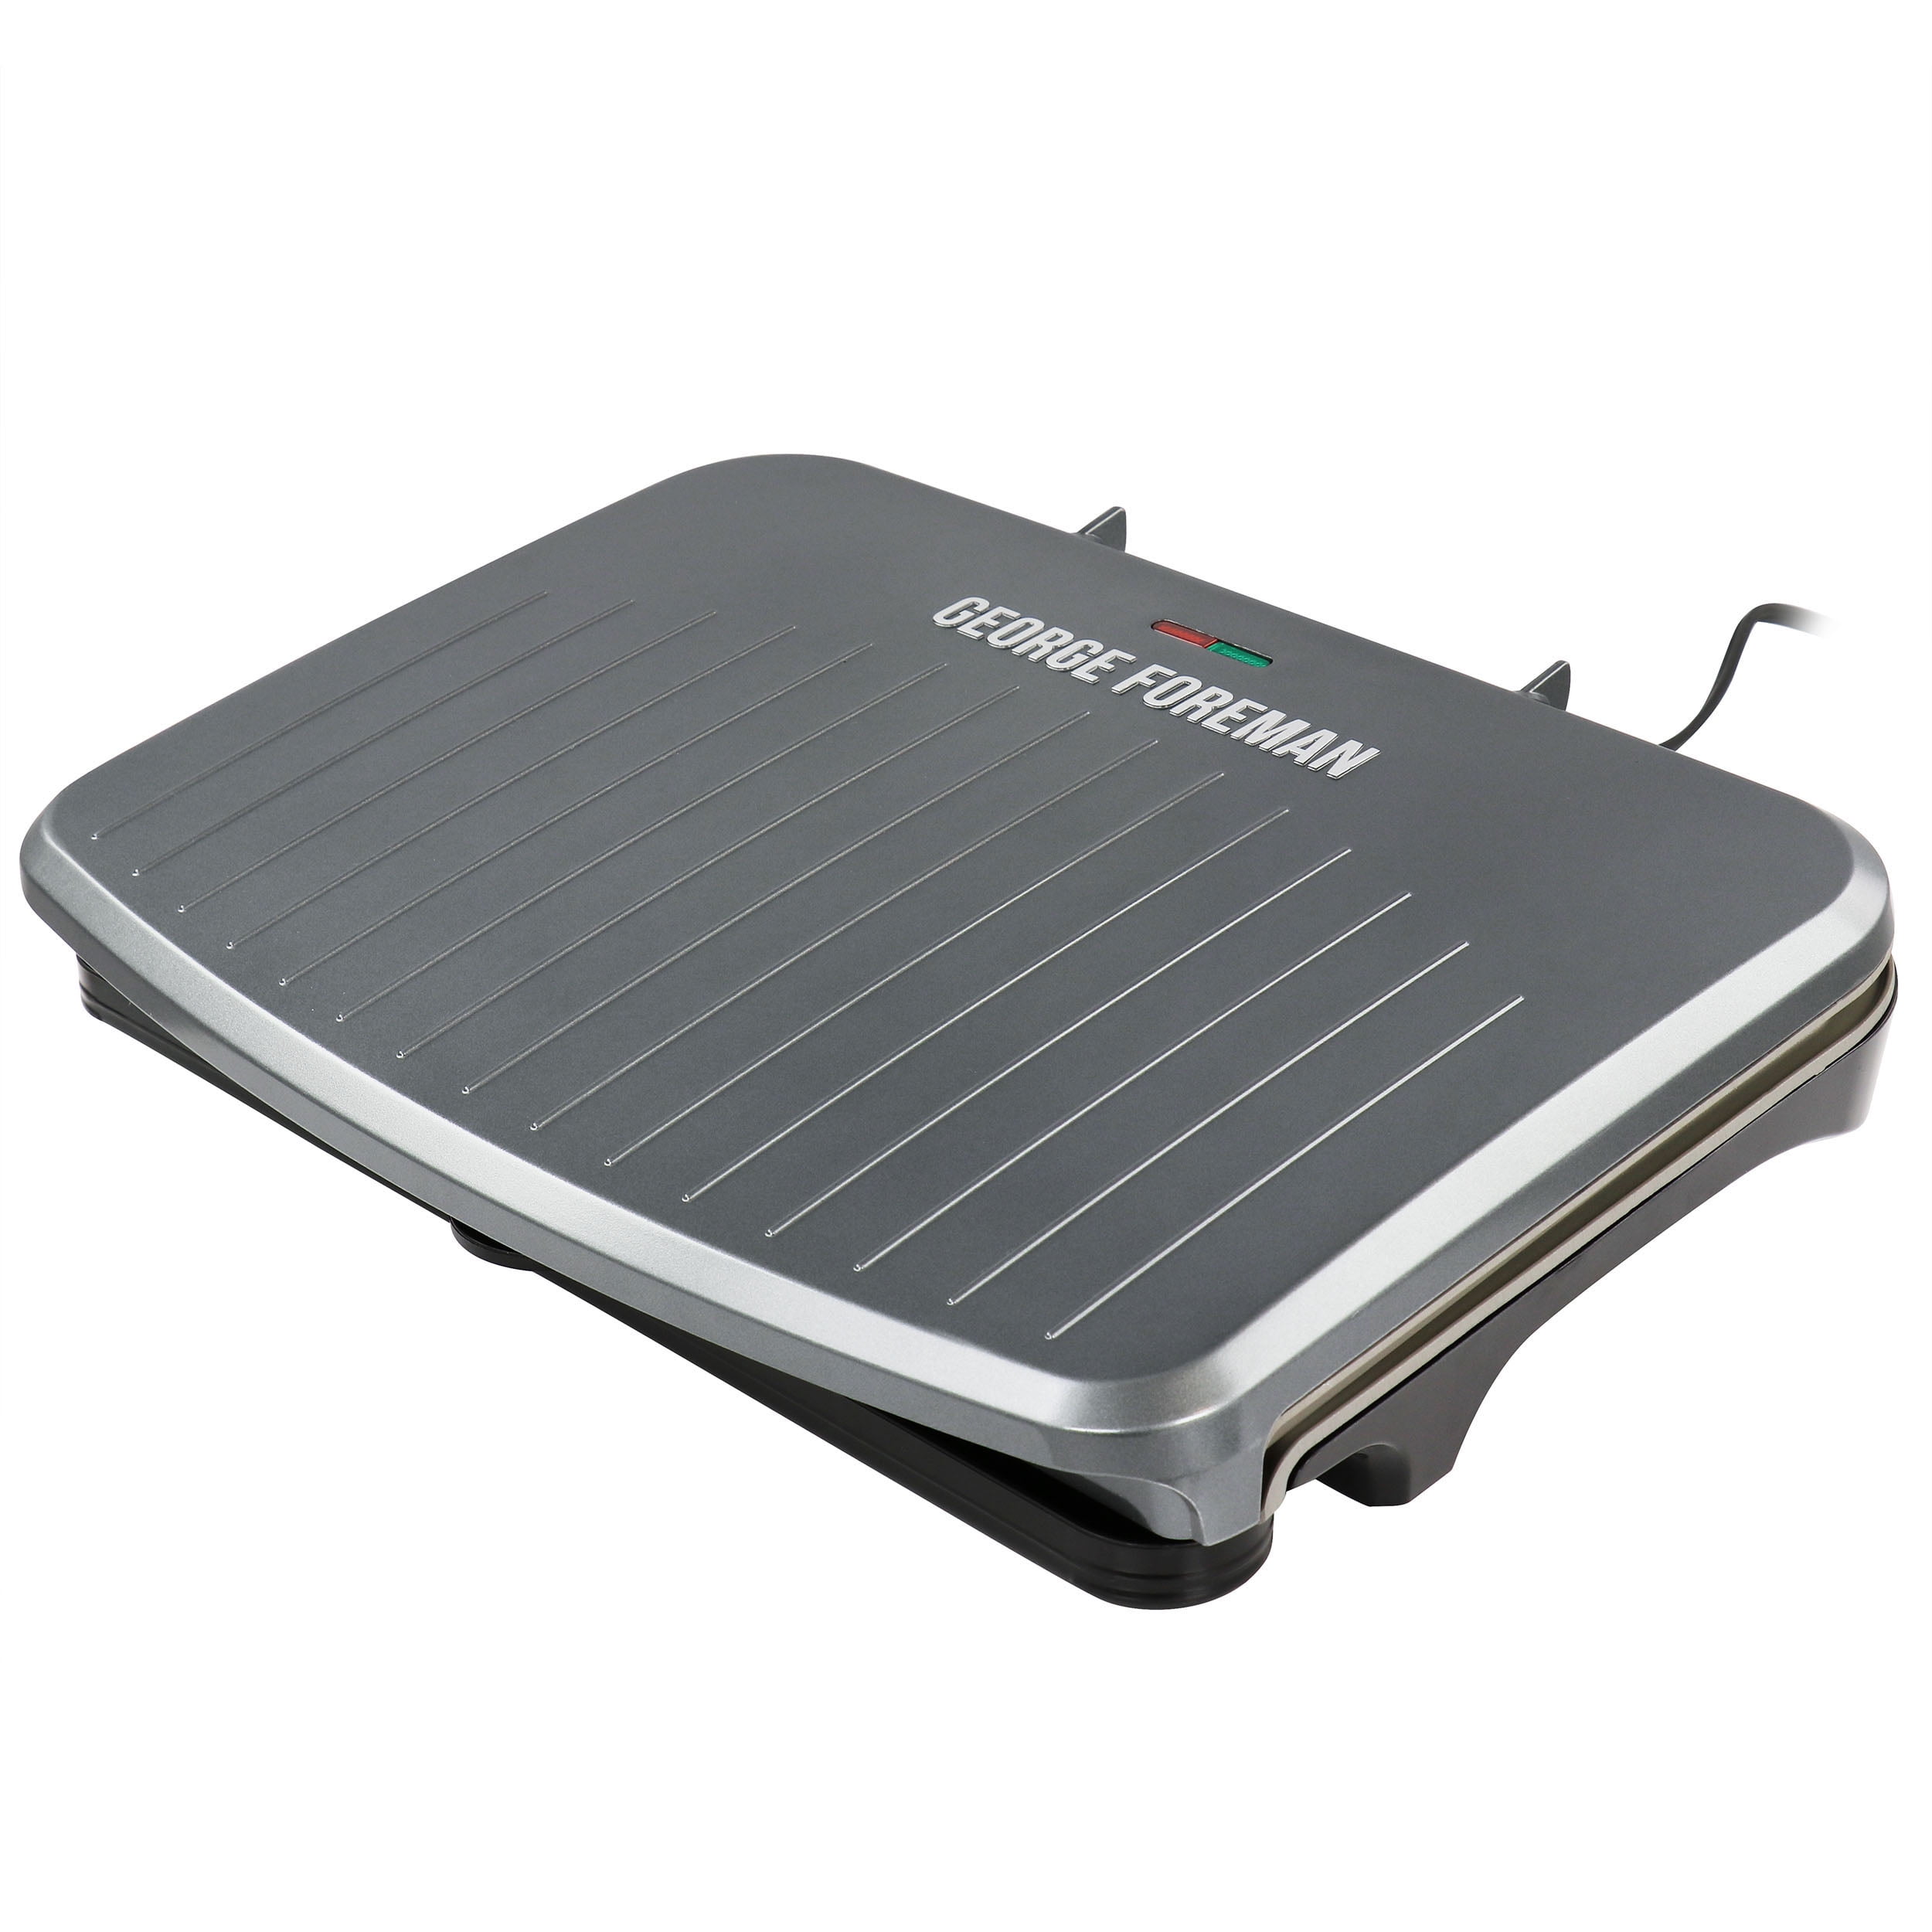 9-Serving Classic Plate Electric Indoor Grill and Panini Press - Gunmetal  Grey